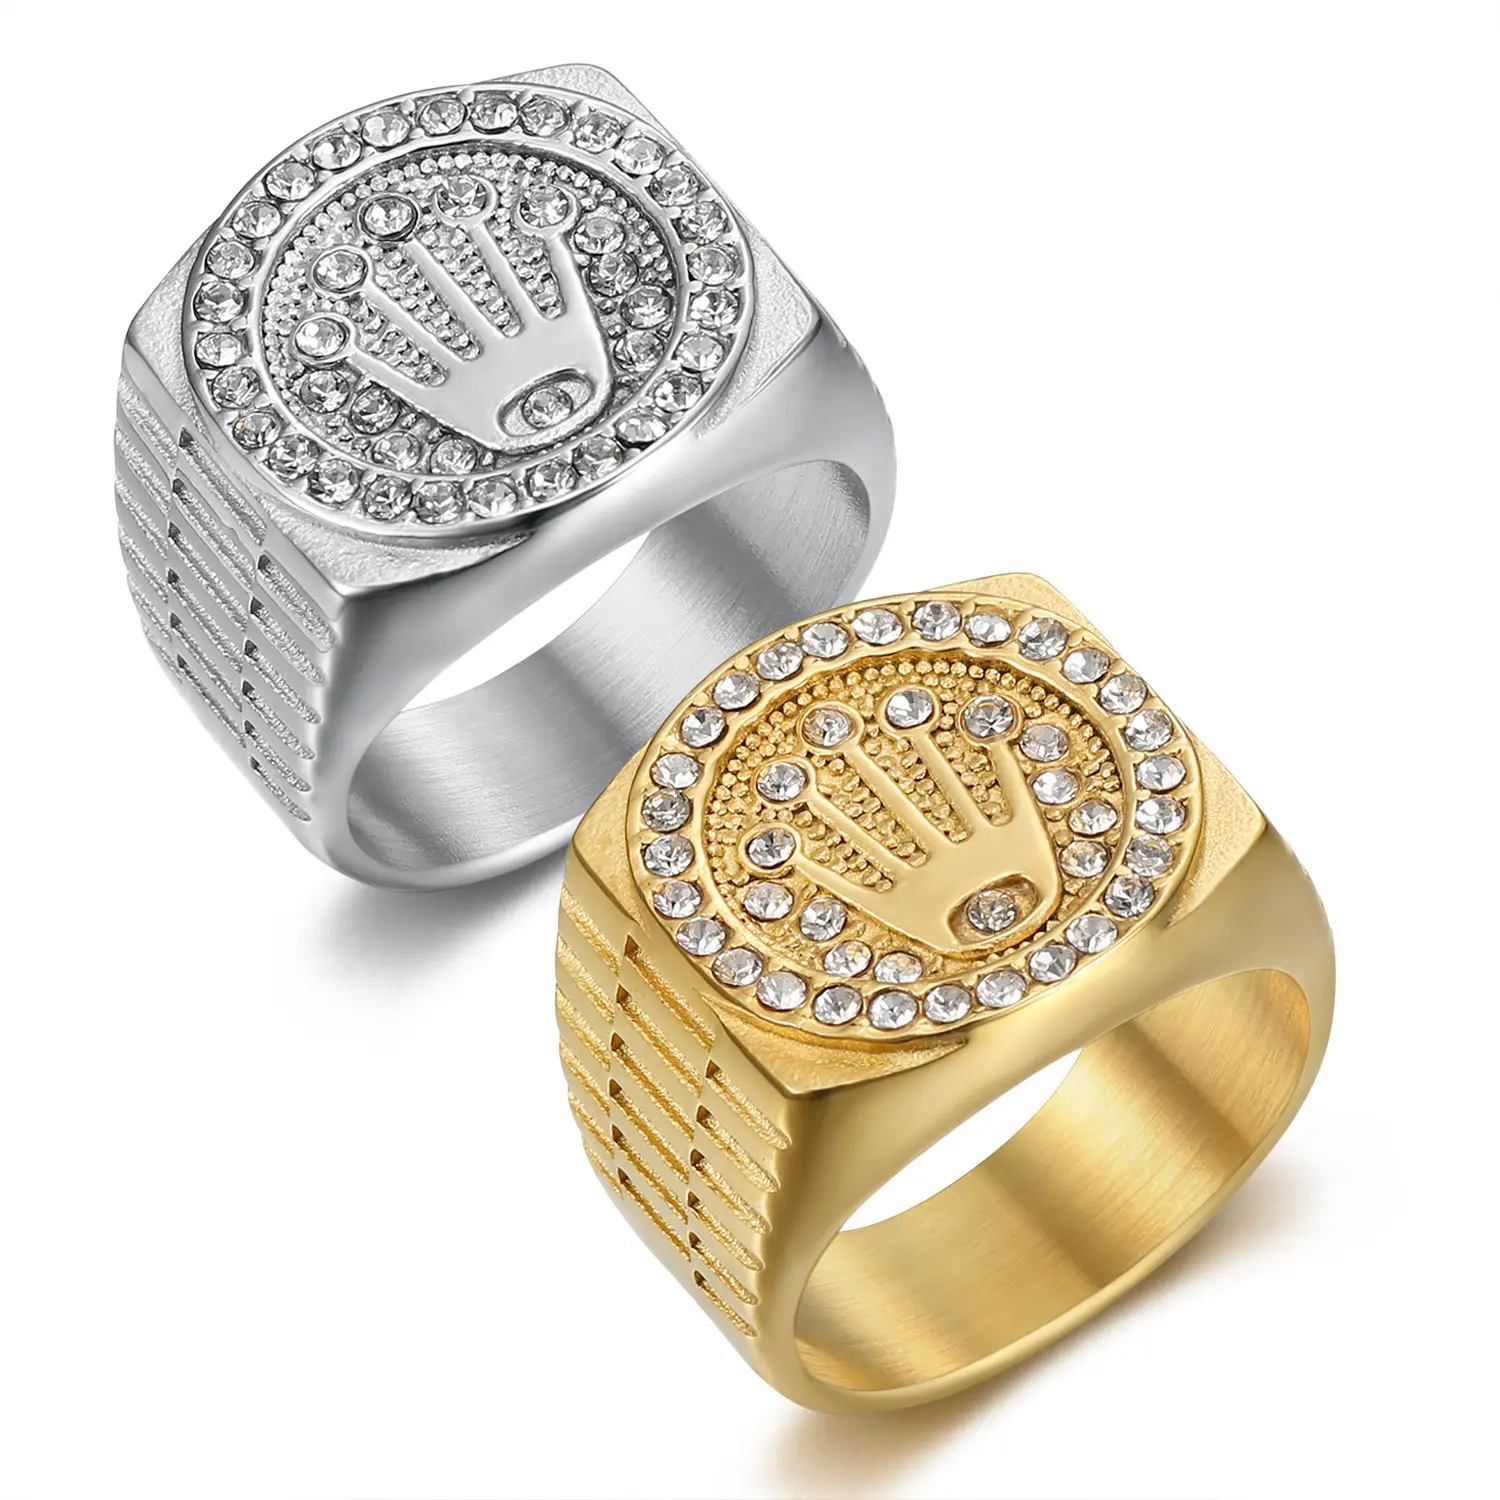 VRIUA Hot Hiphop Rock Crown Ring MenとWomen Gold Plated Ring Jewelry